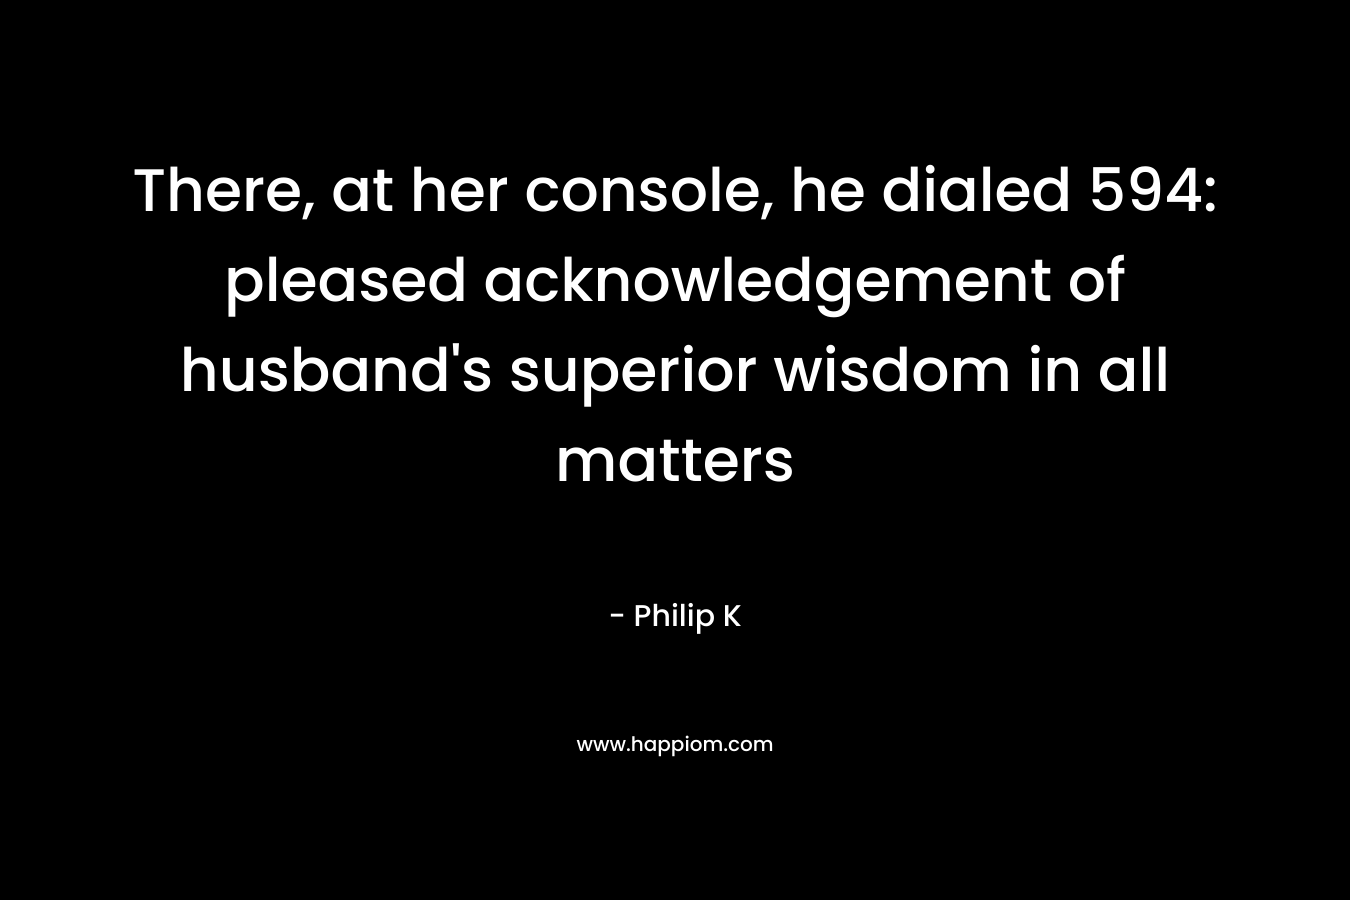 There, at her console, he dialed 594: pleased acknowledgement of husband’s superior wisdom in all matters – Philip K